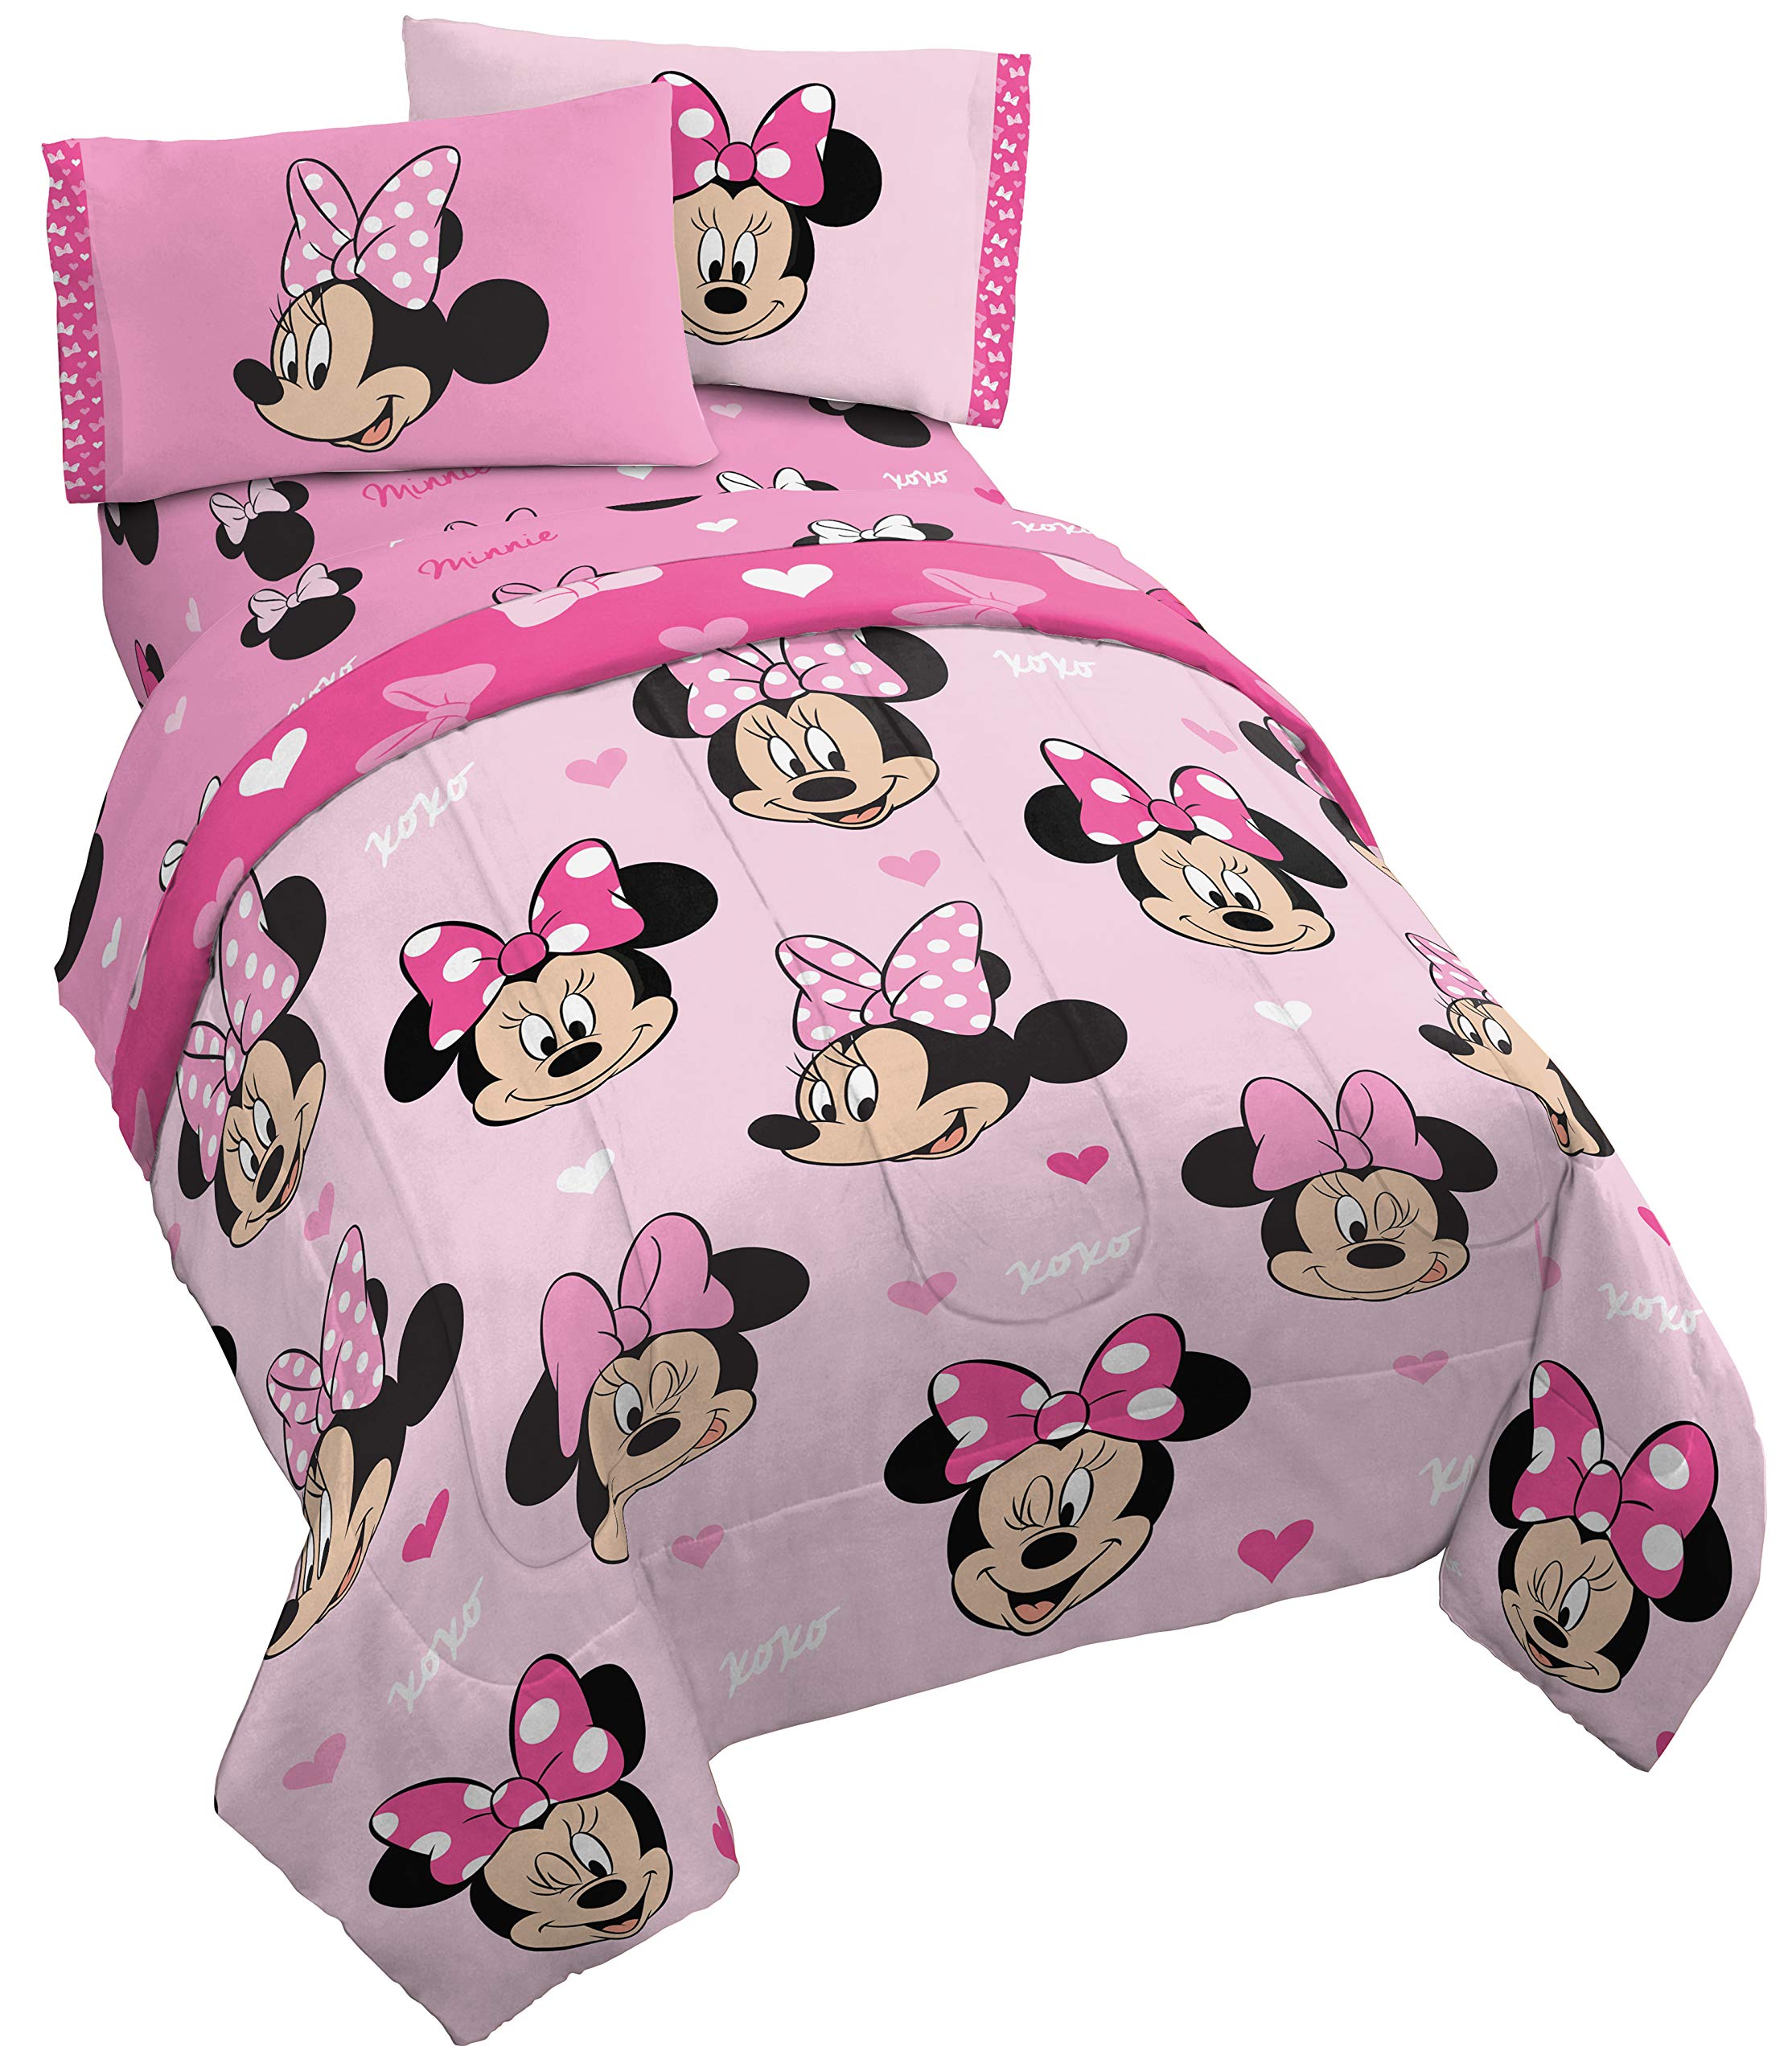 Book Cover Jay Franco Disney Minnie Mouse Hearts N Love 4 Piece Twin Bed Set - Includes Reversible Comforter & Sheet Set - Super Soft Fade Resistant Microfiber - (Official Disney Product)